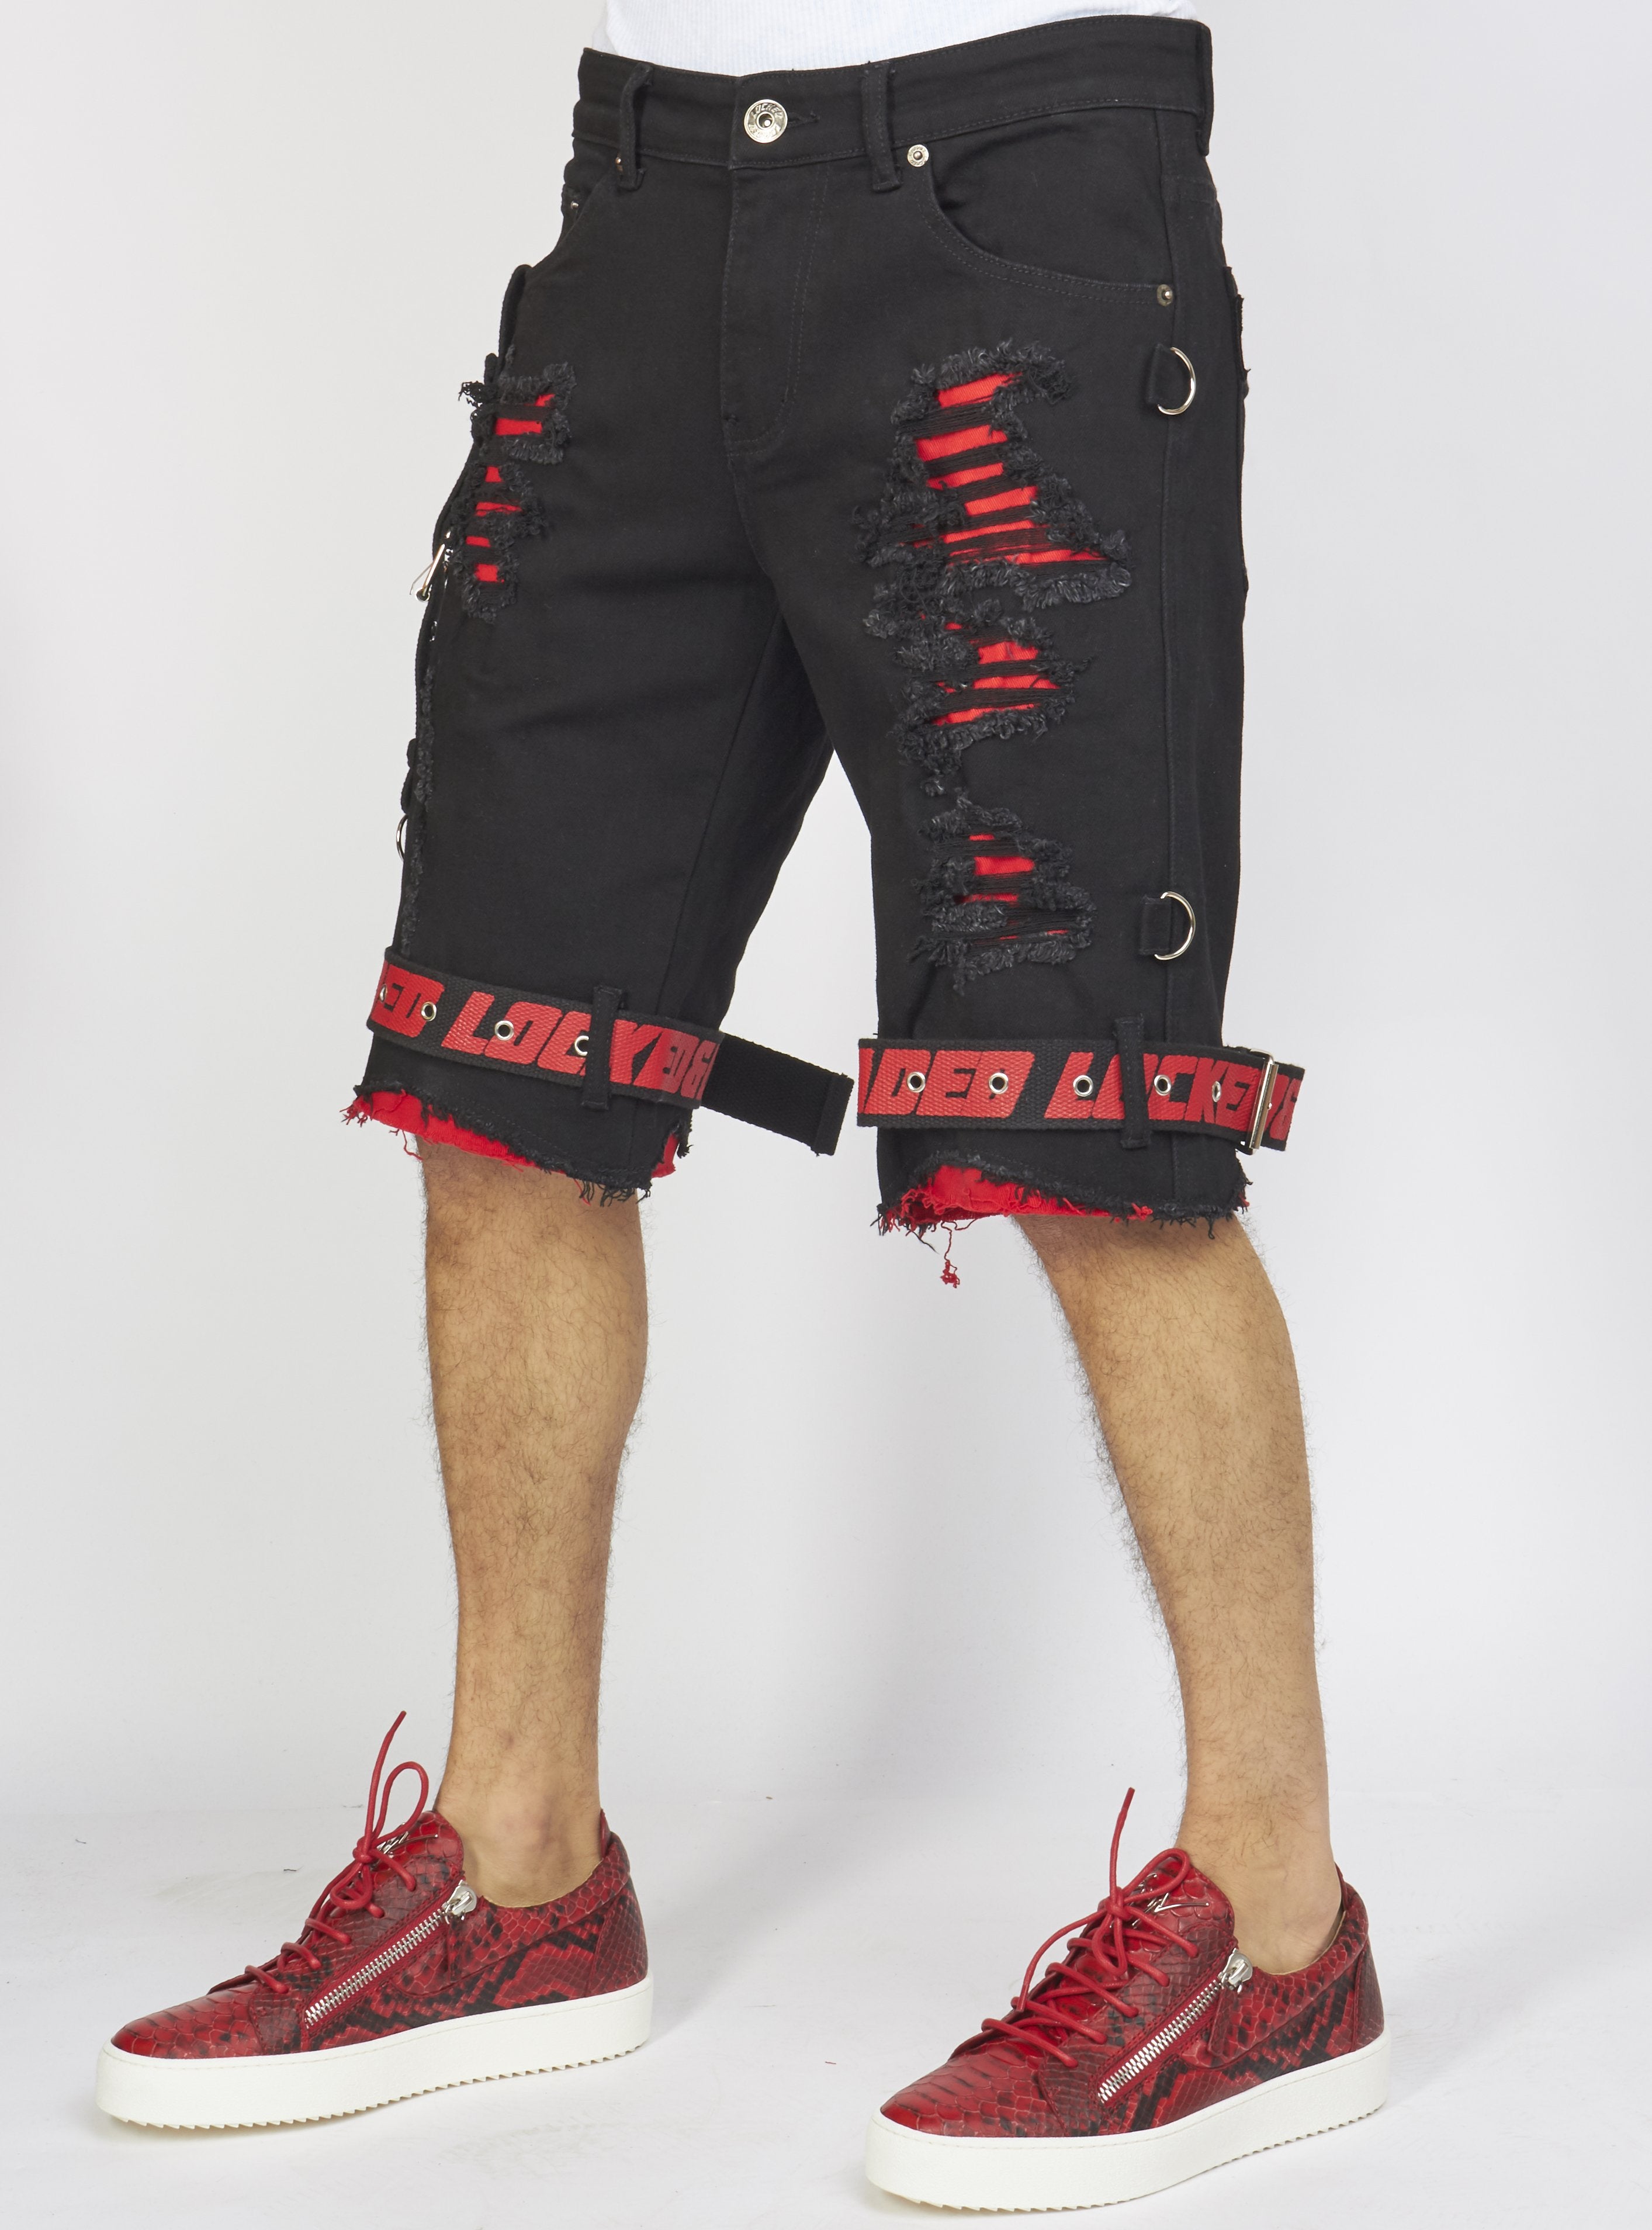 Locked & Loaded Shorts - Jet Black Denim With Red - Featuring Black / Red Straps - LDS421101